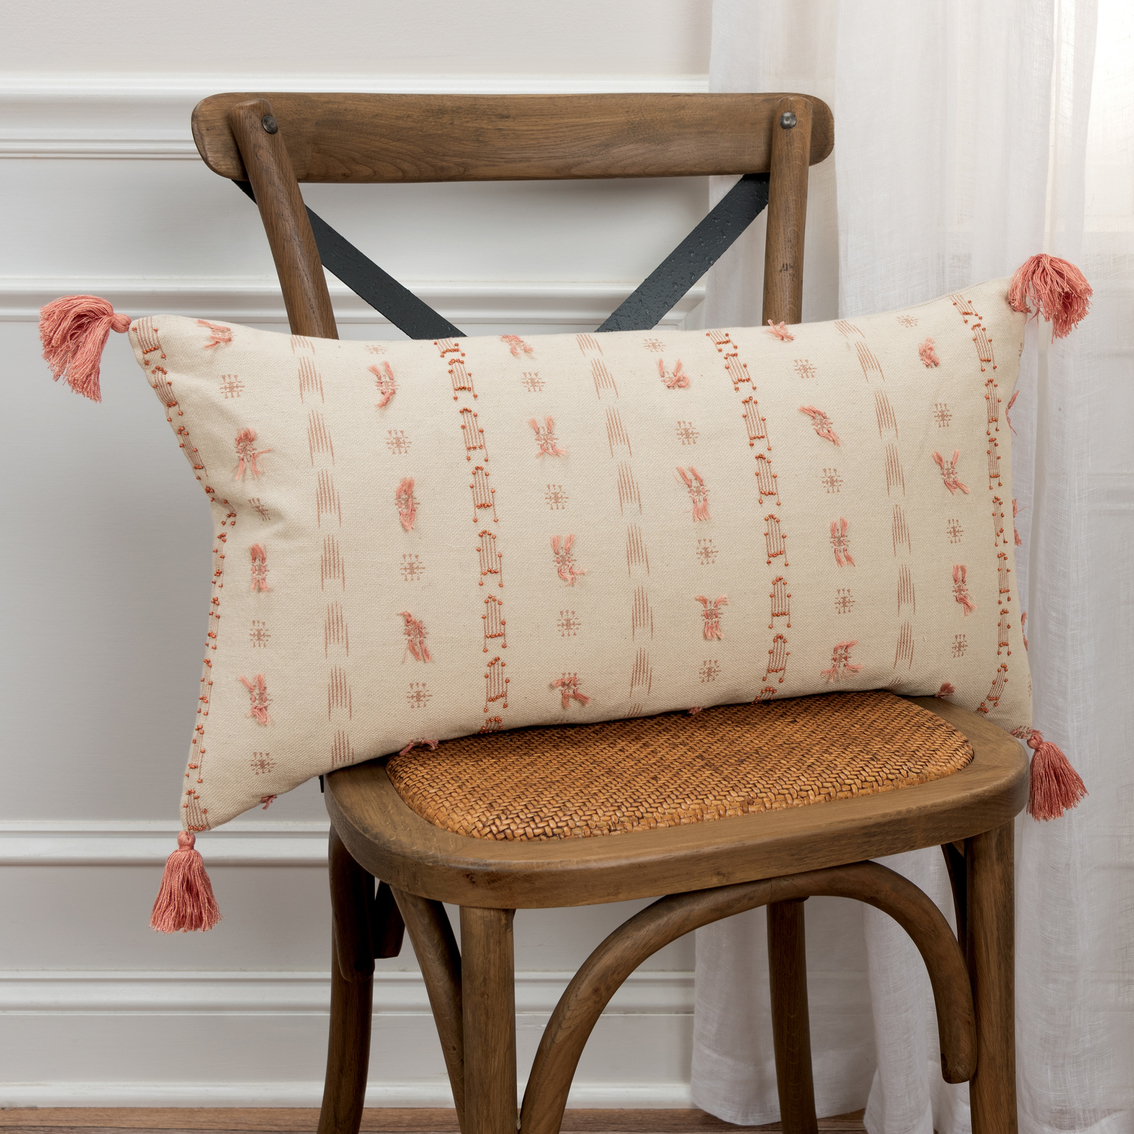 Rizzy Home Geometric Blush Polyester Filled Pillow - Image 2 of 5